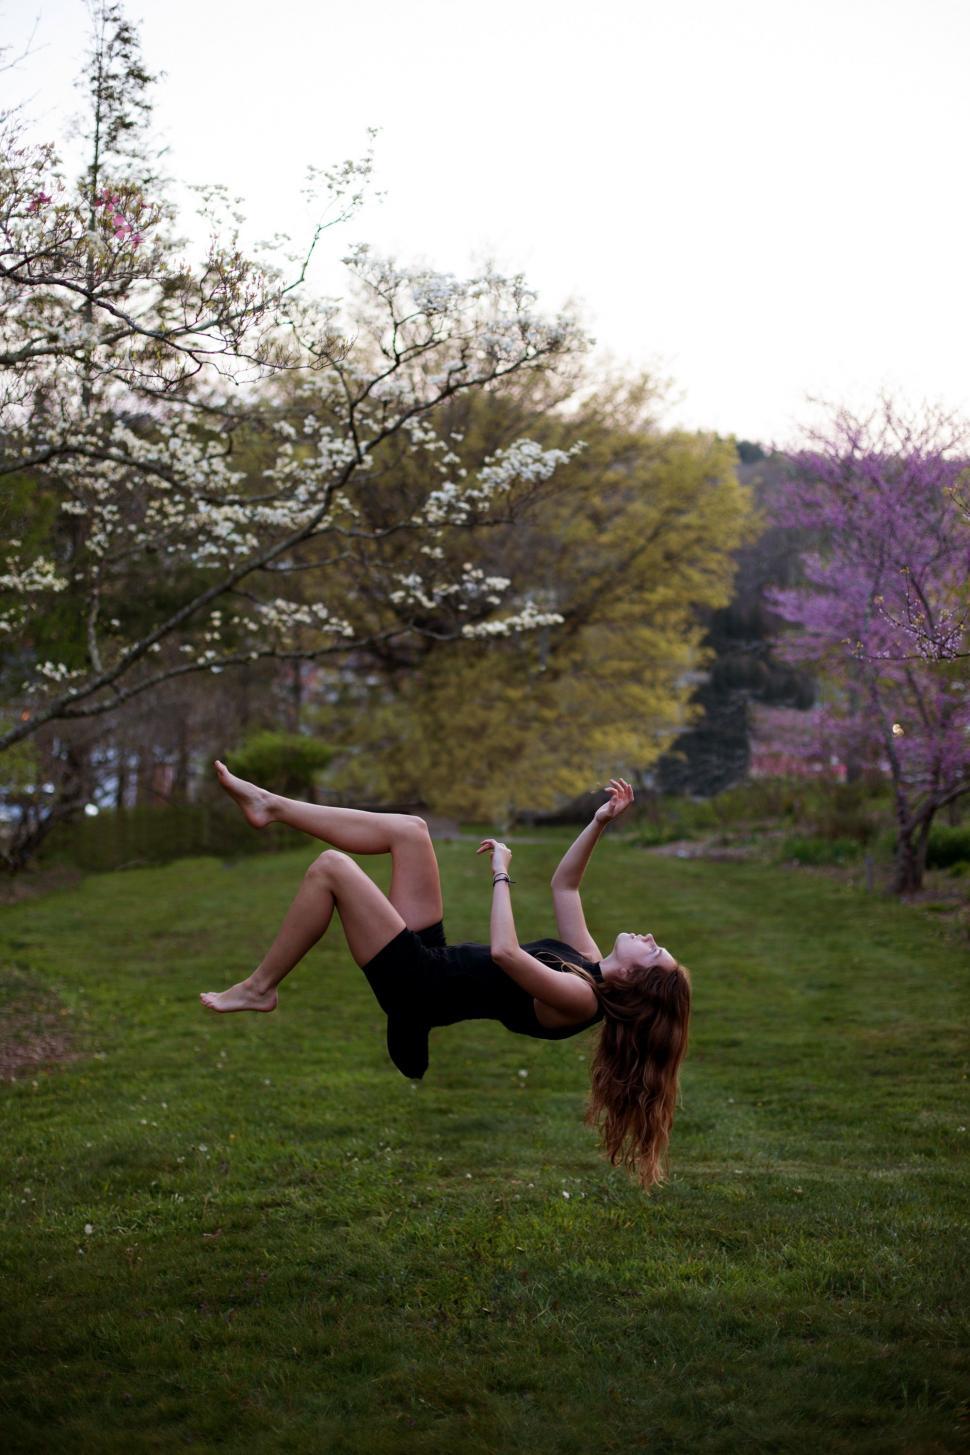 Free Image of Woman Performing Handstand in Grass 